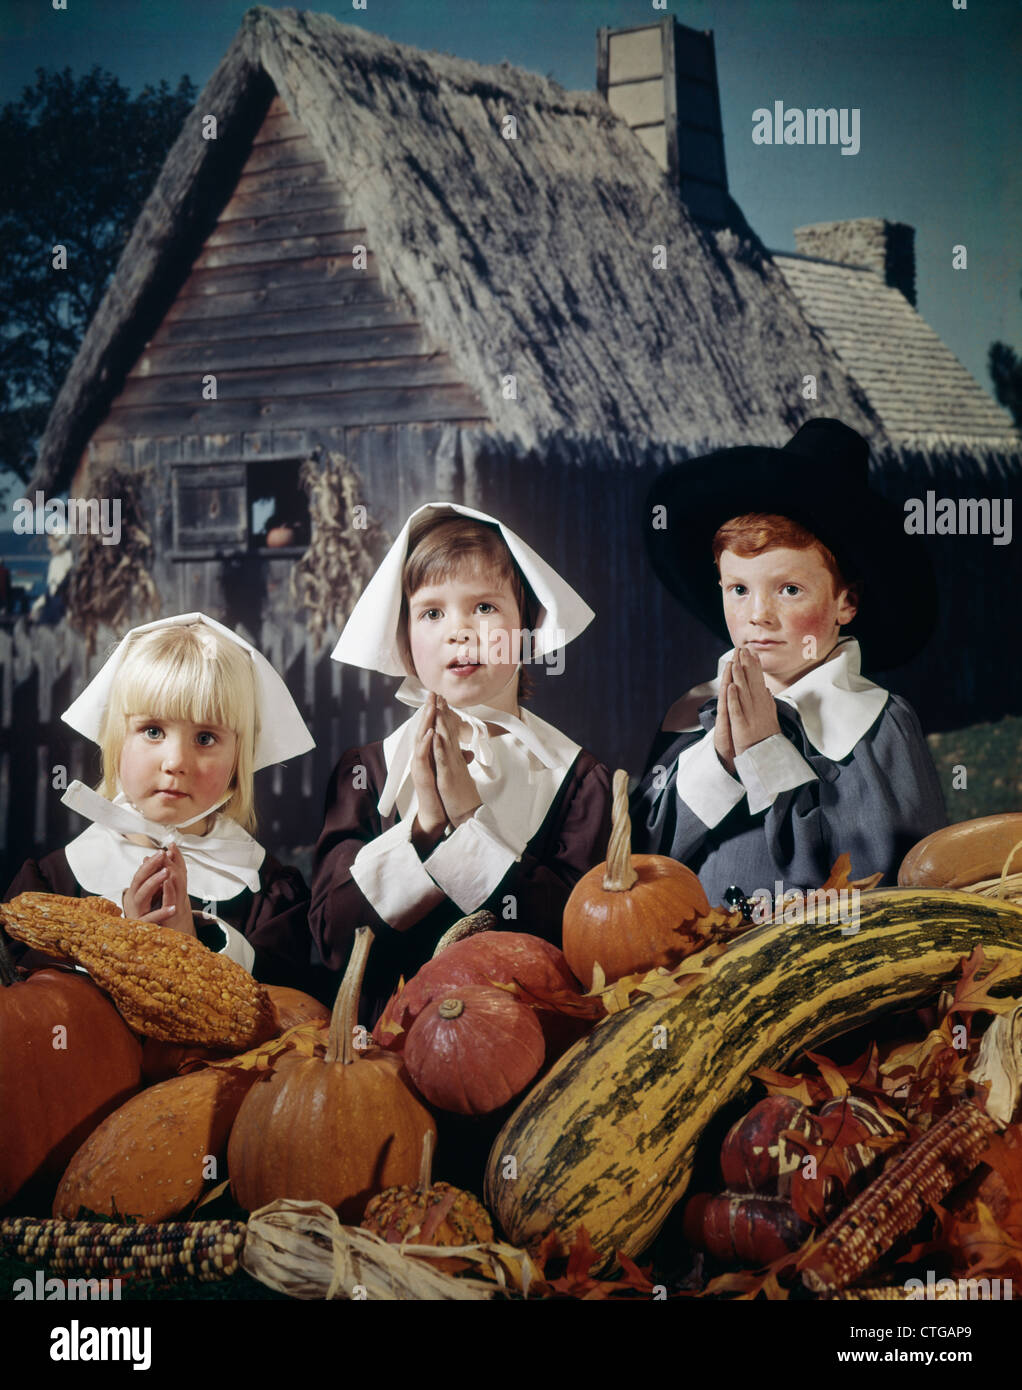 1960s THREE CHILDREN WEARING PILGRIM OUTFITS AND SAYING GRACE BEFORE THANKSGIVING HARVEST VEGETABLES Stock Photo